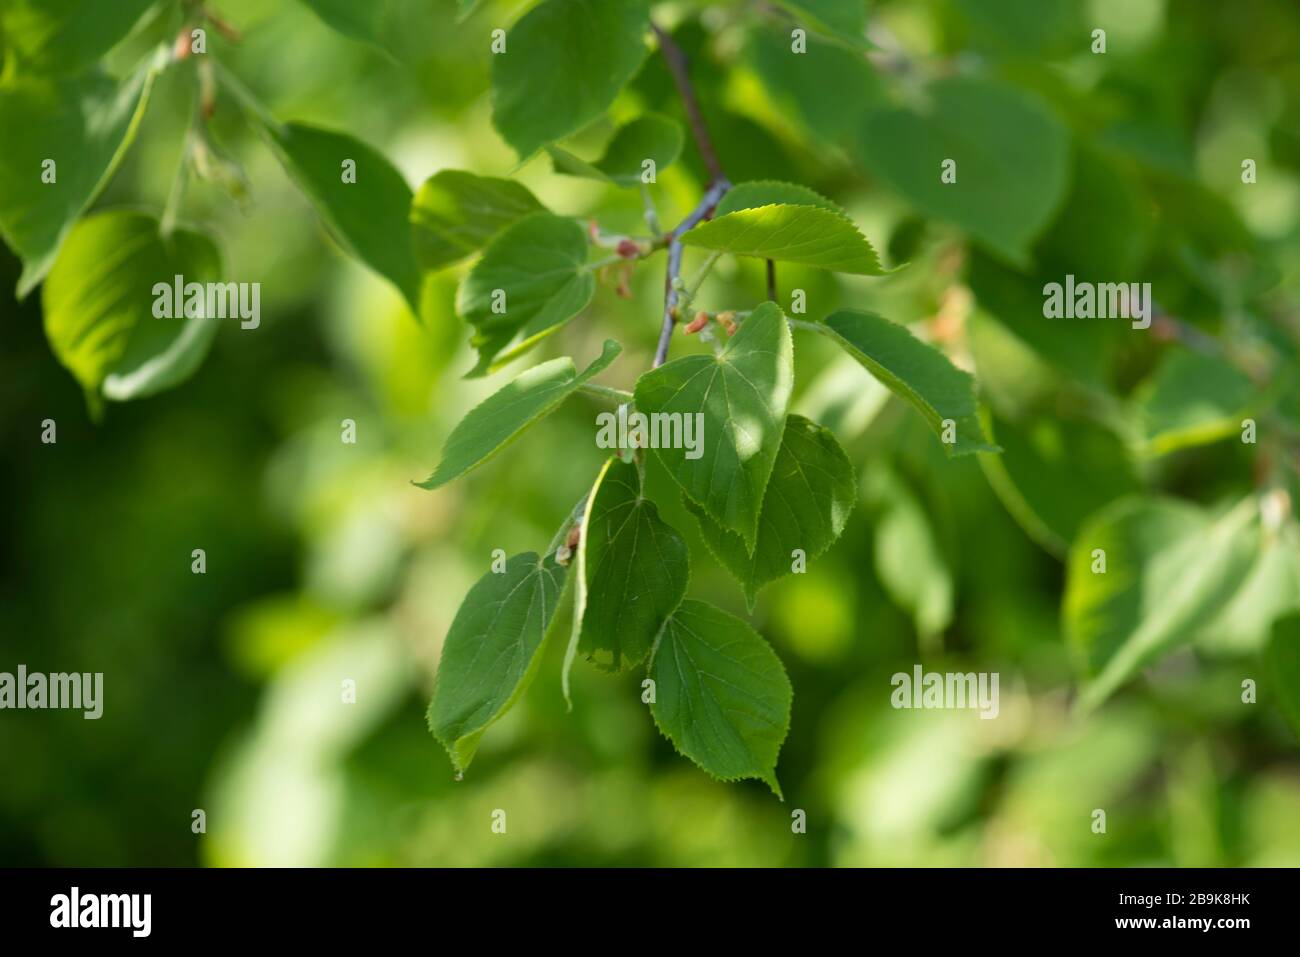 Bright green healthy plant. Plan health protection concept. UN plant health year. Green natural background. Stock Photo